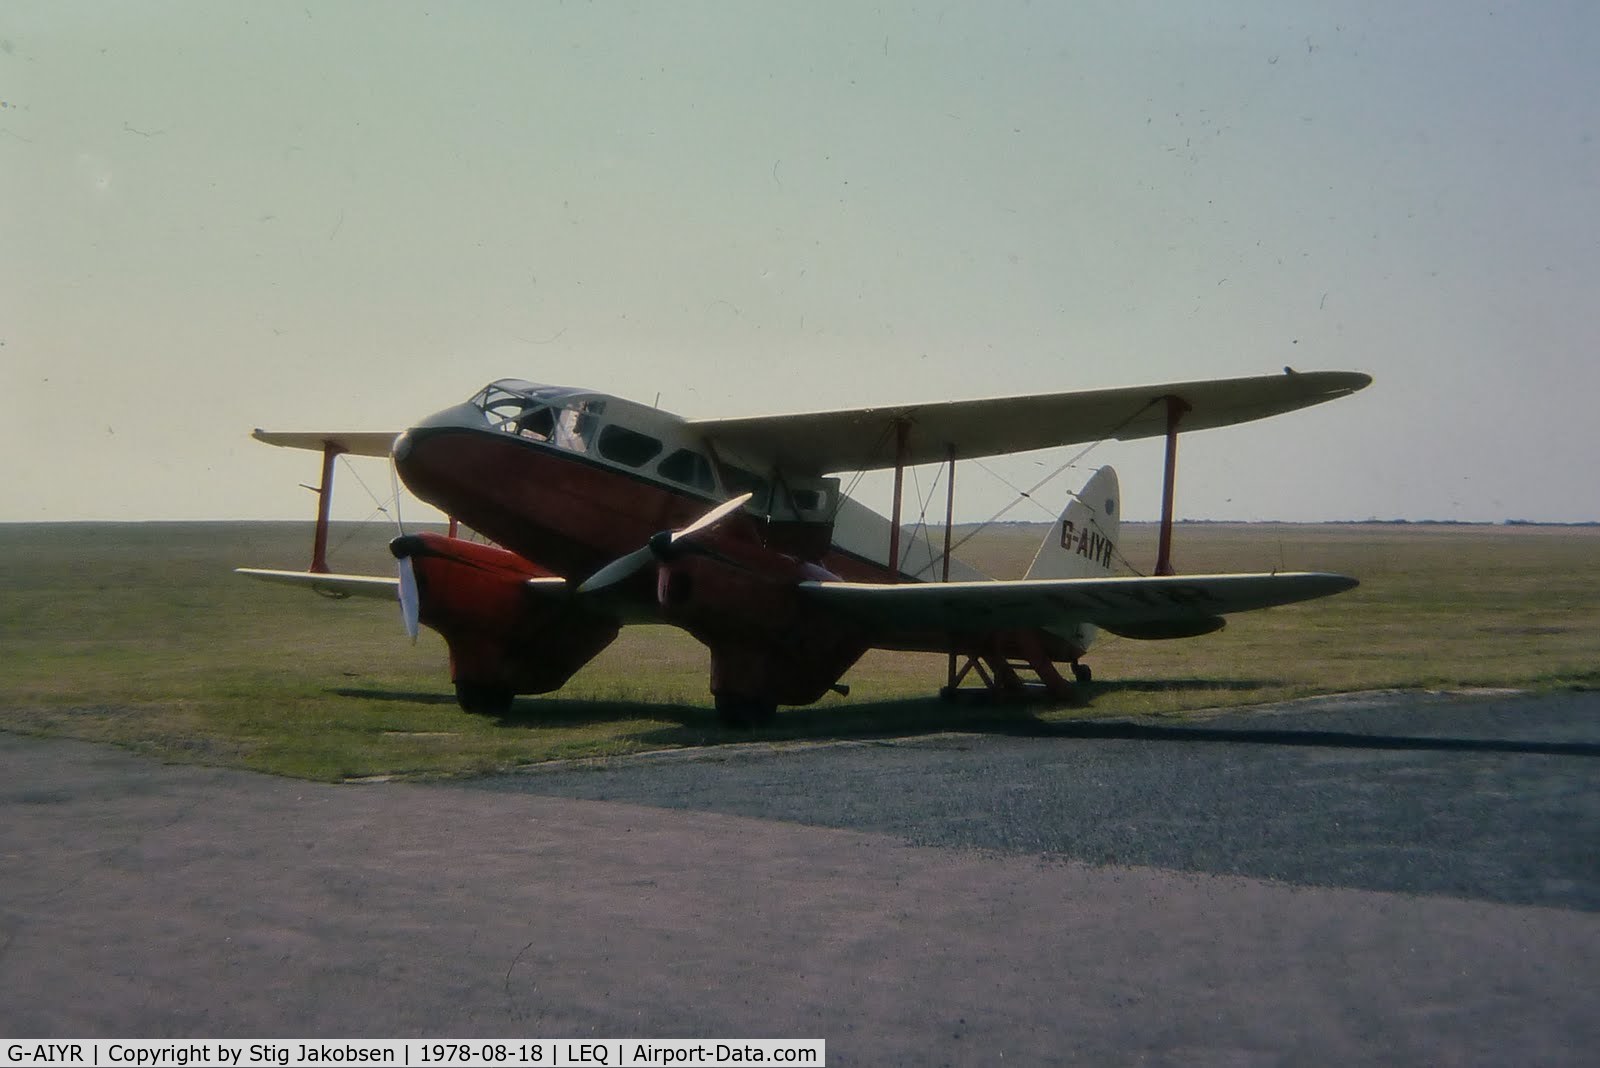 G-AIYR, 1943 De Havilland DH-89A Dominie/Dragon Rapide C/N 6676, G-AIYR making scenic flights from Land's End Airport back in 1978